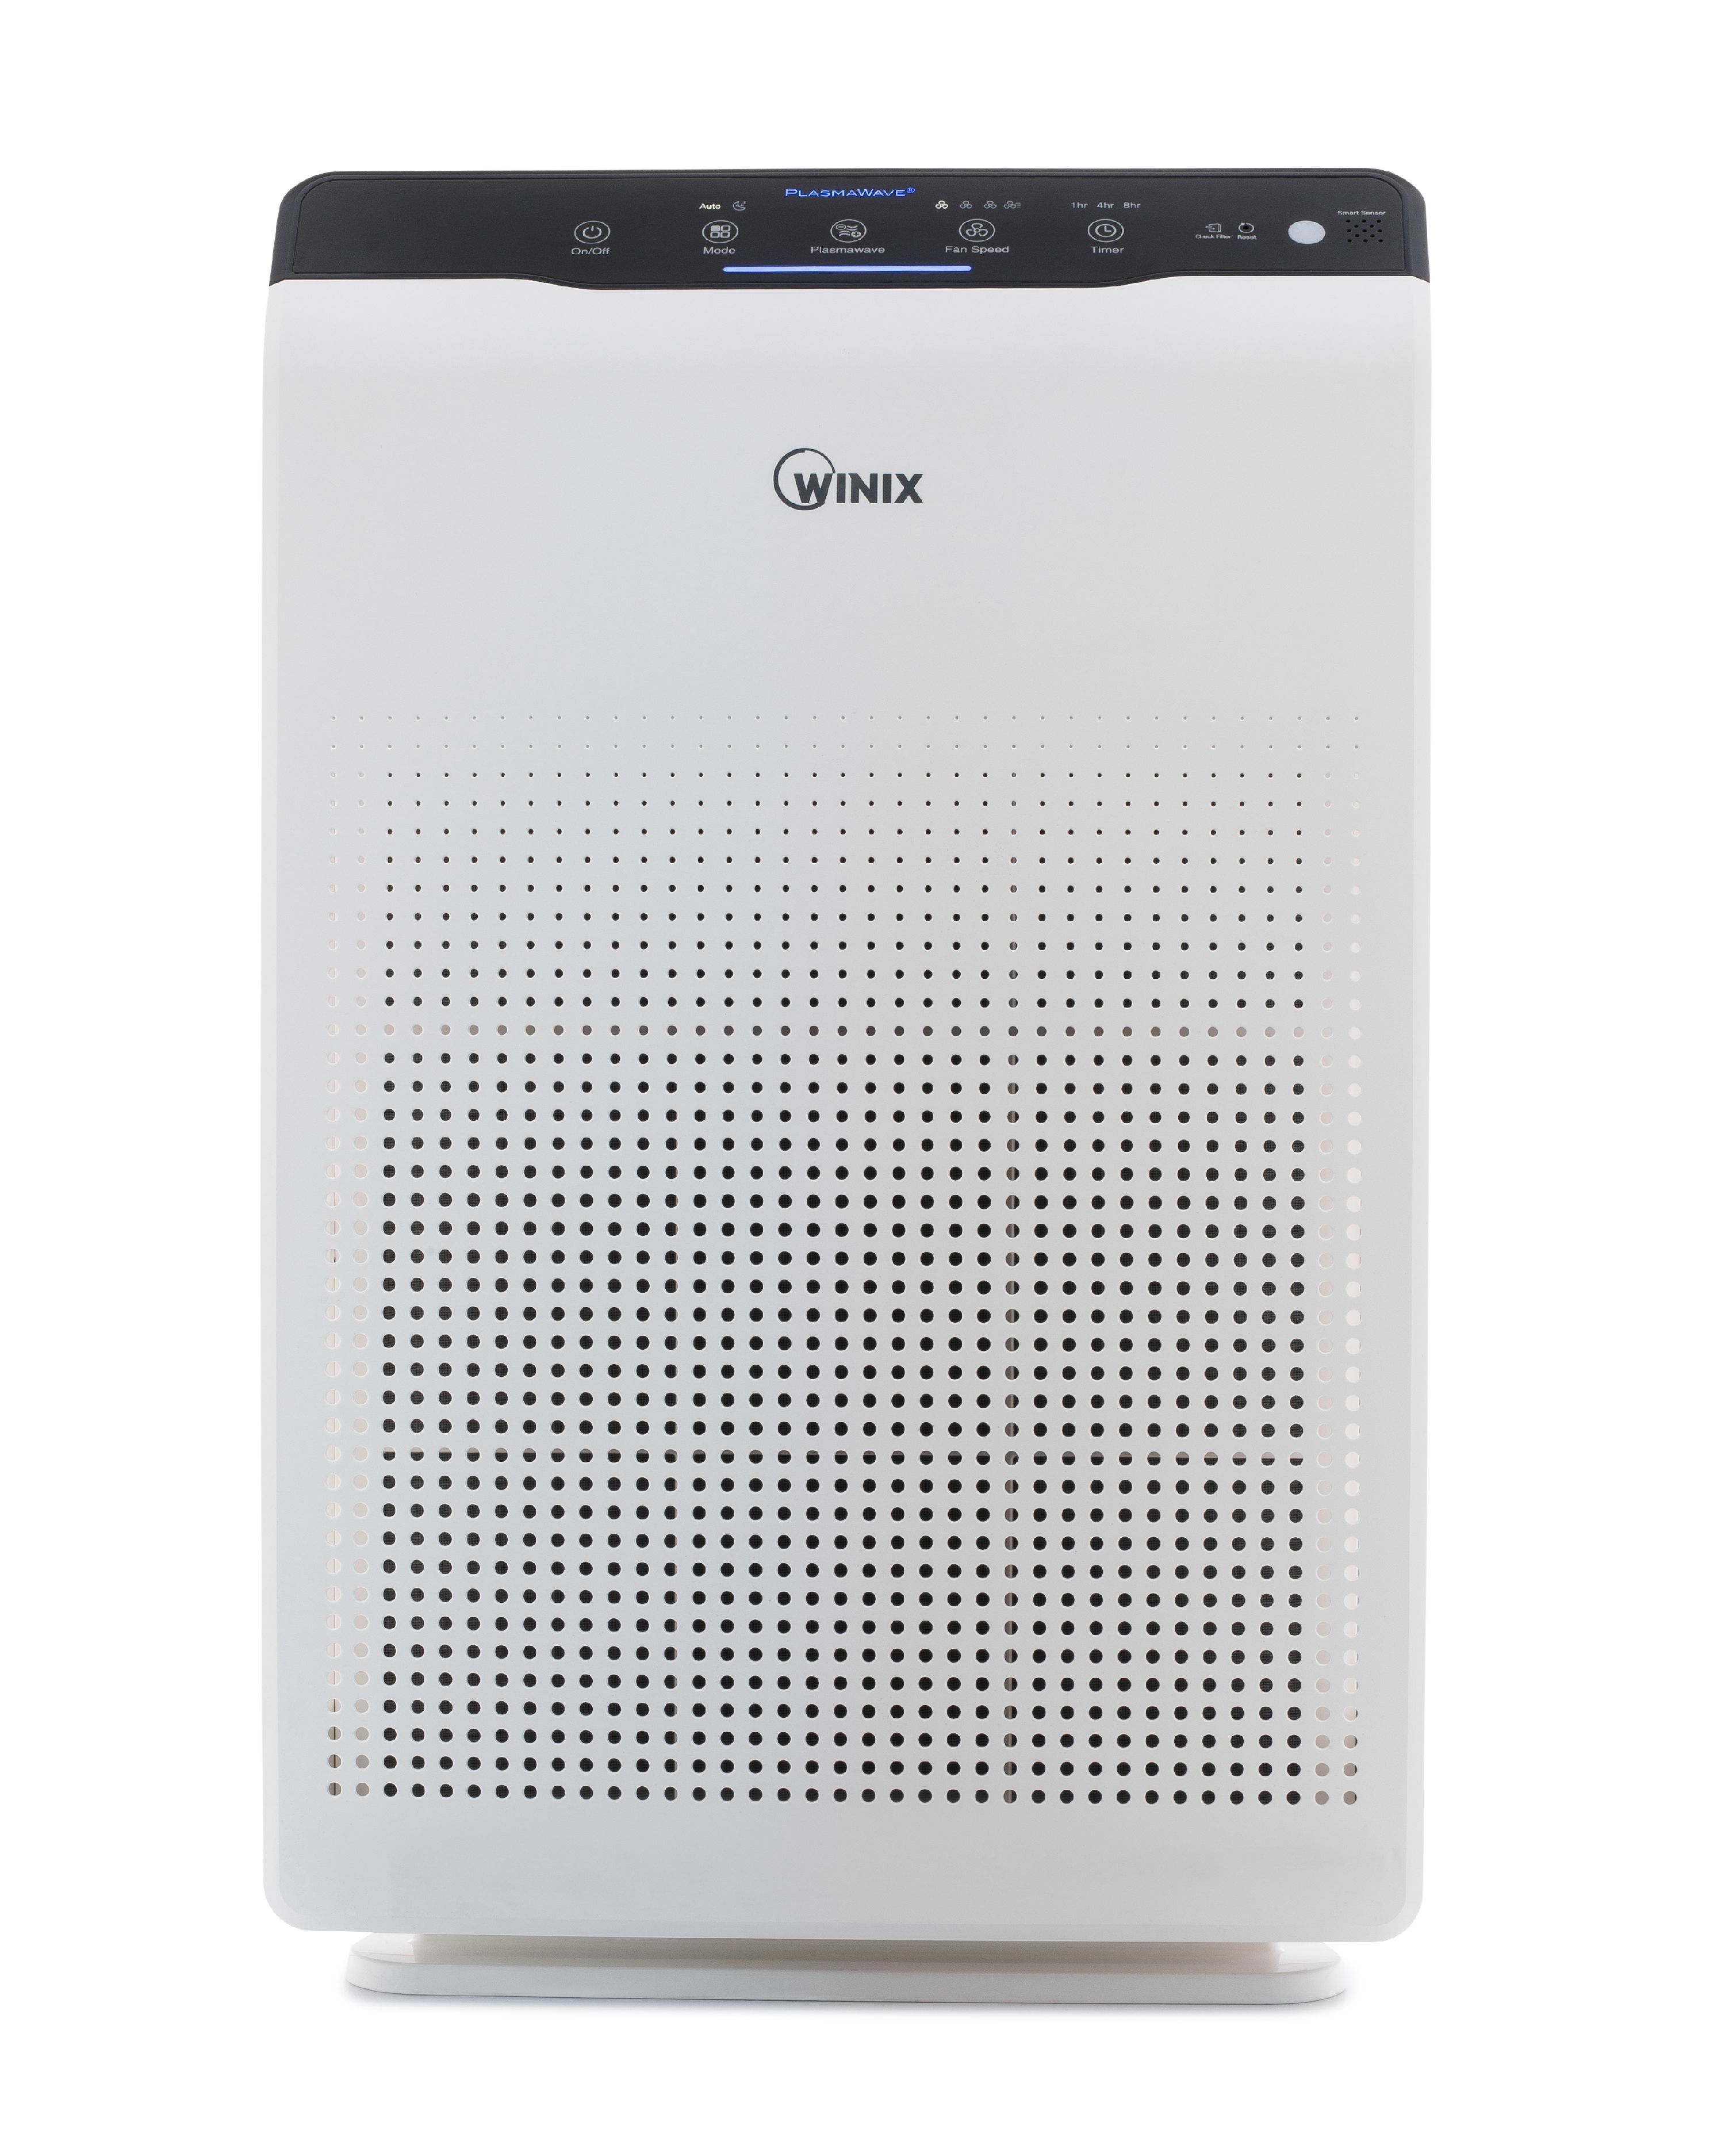 Winix C535 True HEPA 4-Stage Air Purifier for allergens and VOCs with 2 Years of Filters and PlasmaWave Technology AHAM Verified for 360 sq ft and Max Room Capacity 1728 sq ft. - image 2 of 9